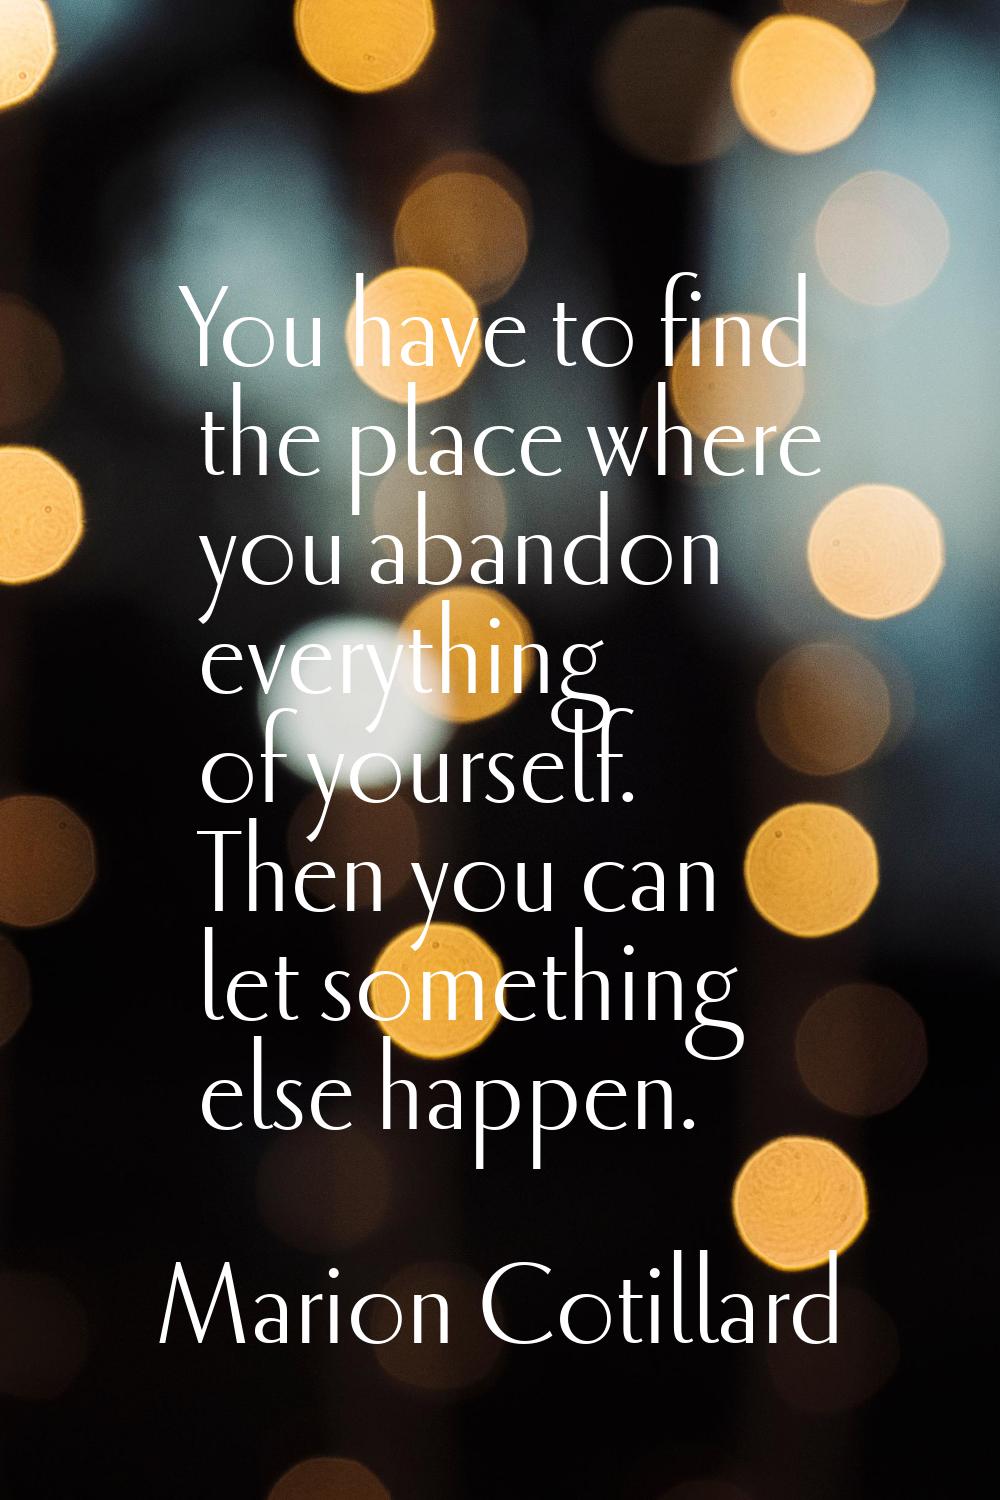 You have to find the place where you abandon everything of yourself. Then you can let something els